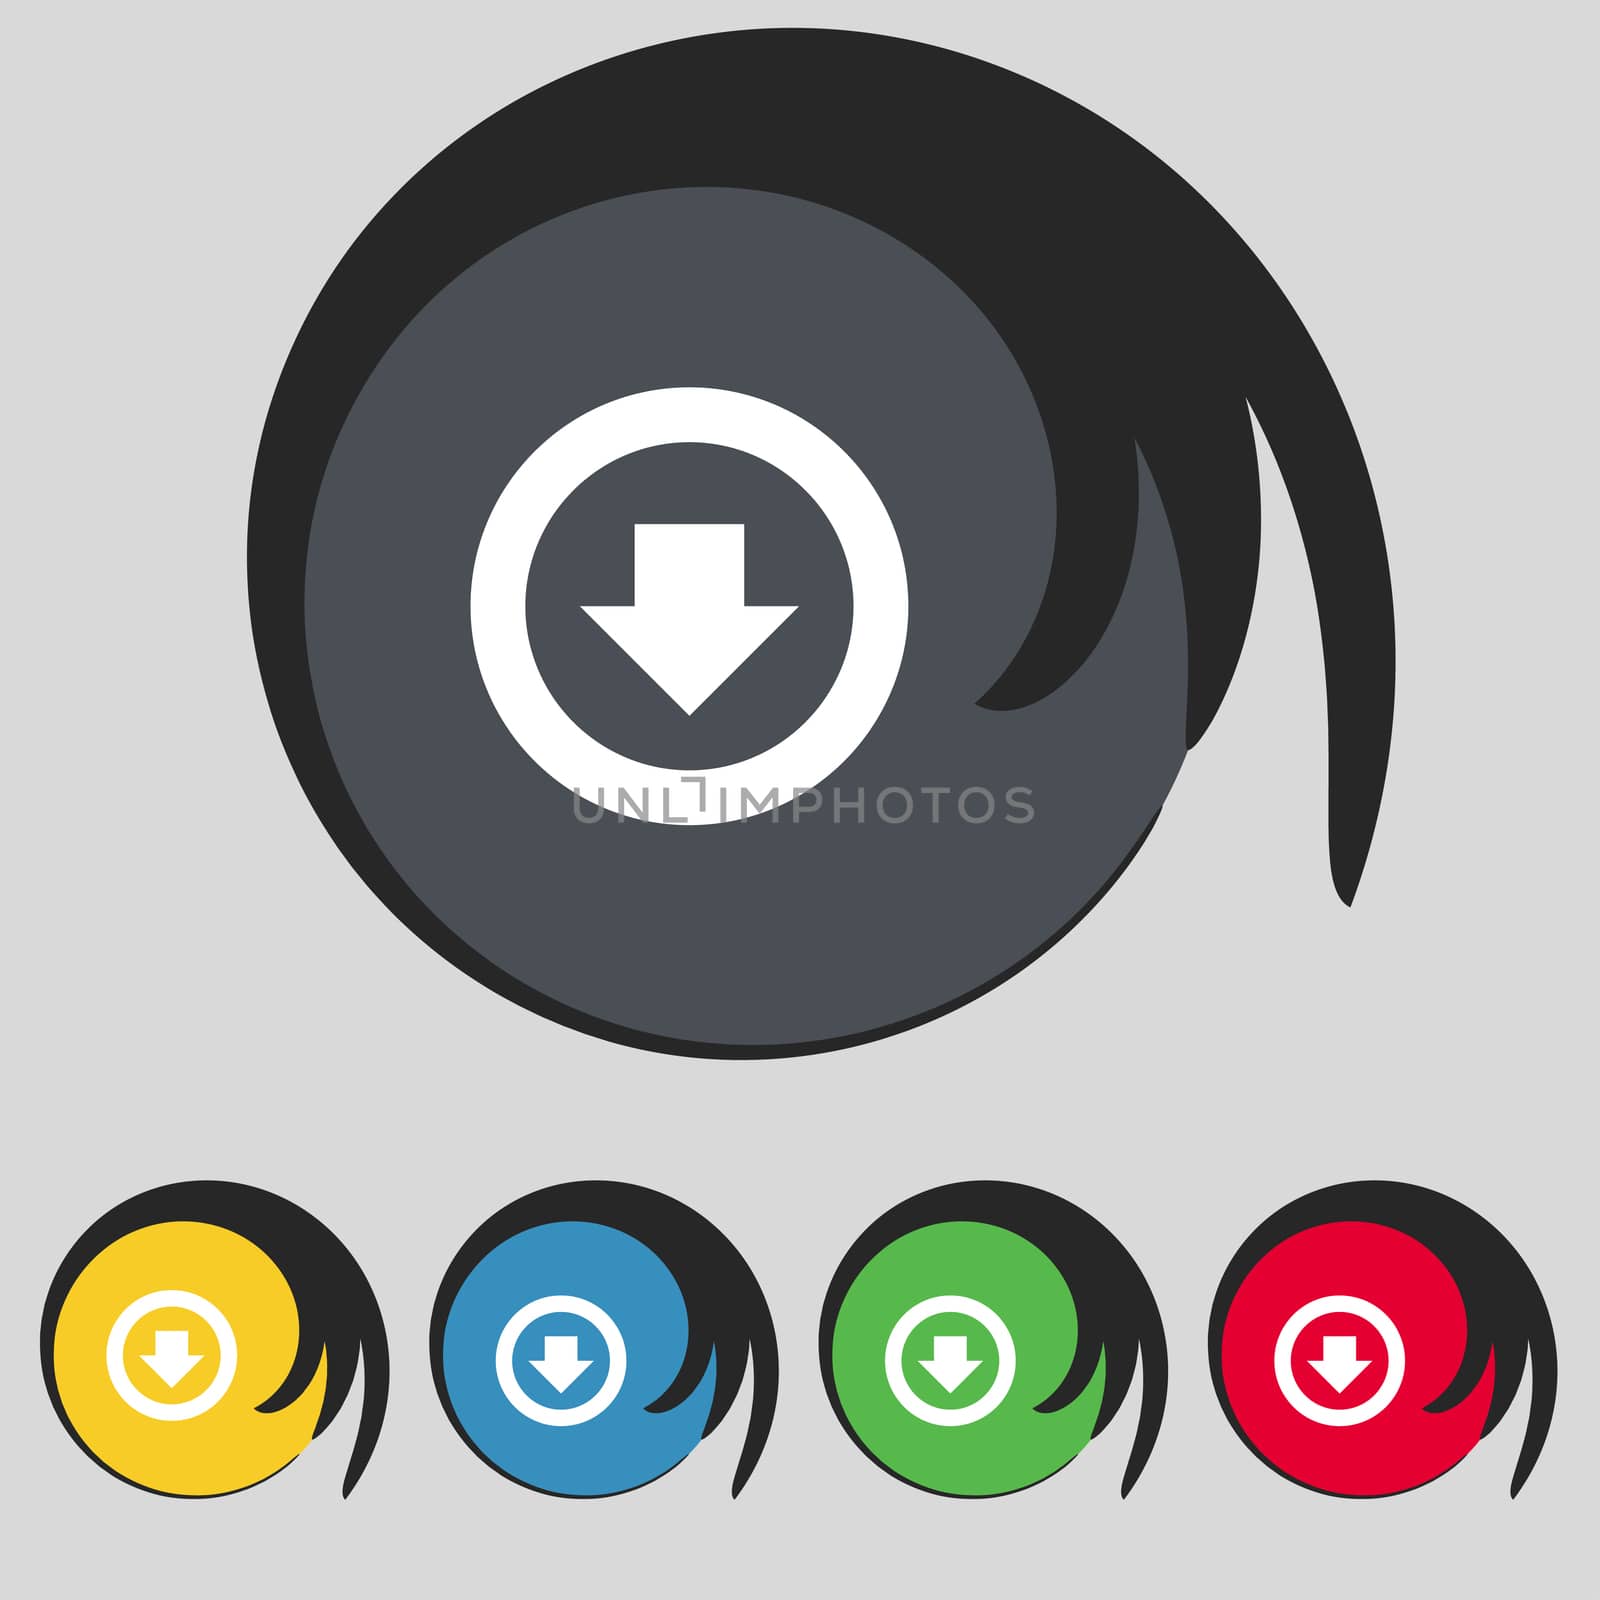 Arrow down, Download, Load, Backup icon sign. Symbol on five colored buttons. illustration